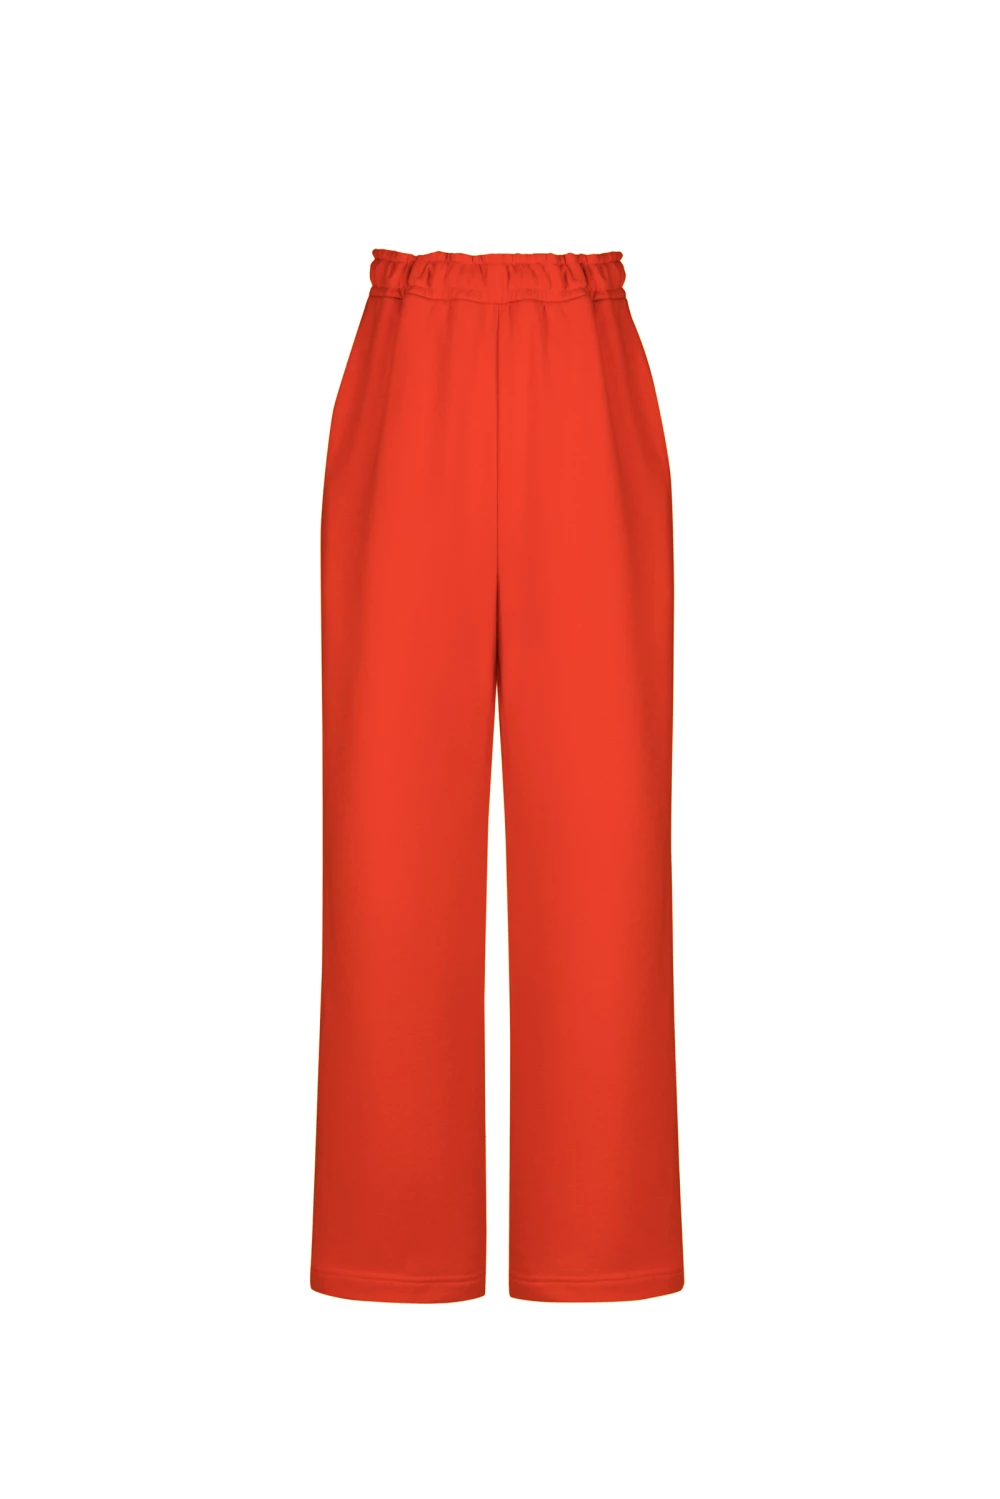 pants "real big" in red color